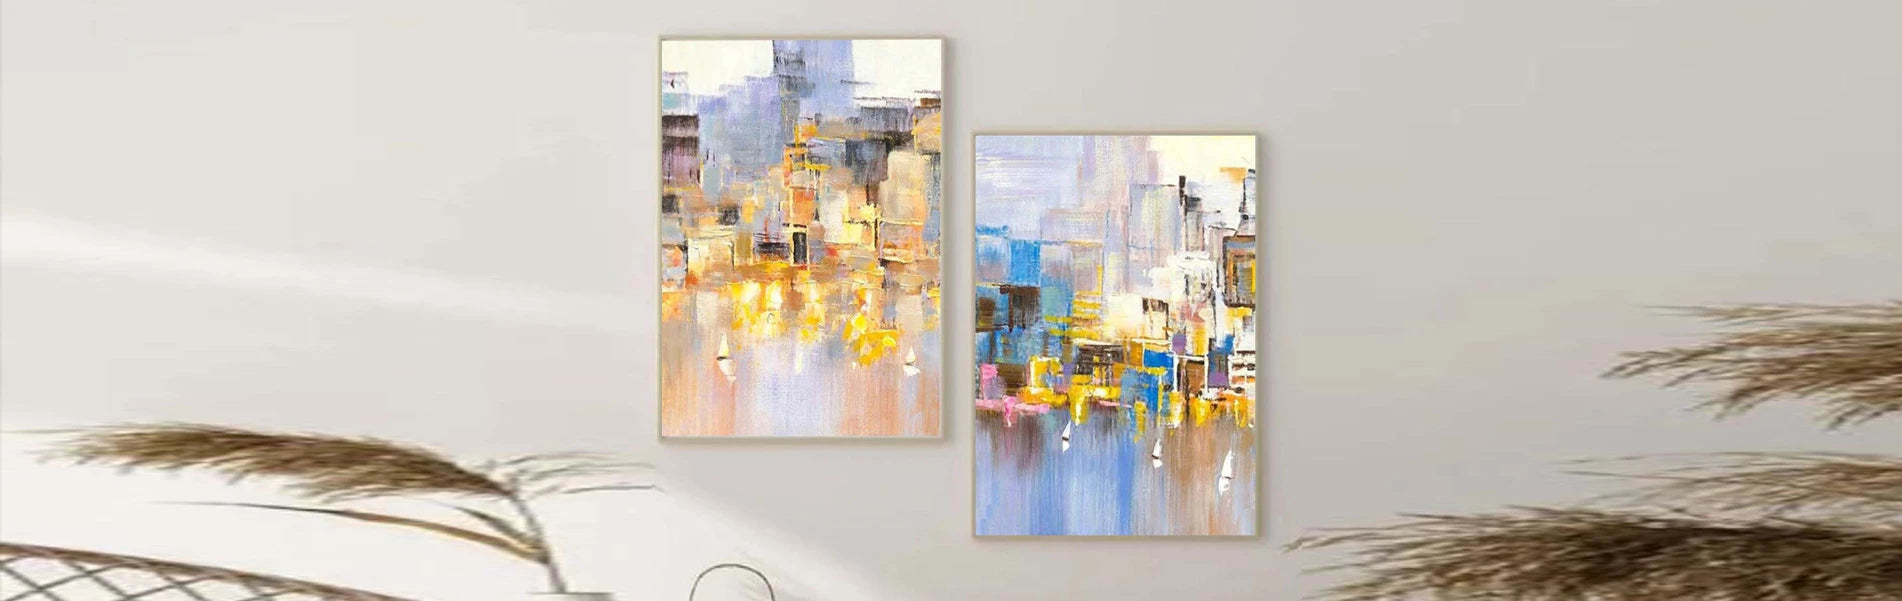 2 Pieces Colorful Abstract Canvas Painting Large Diptychs Bright Wall ...